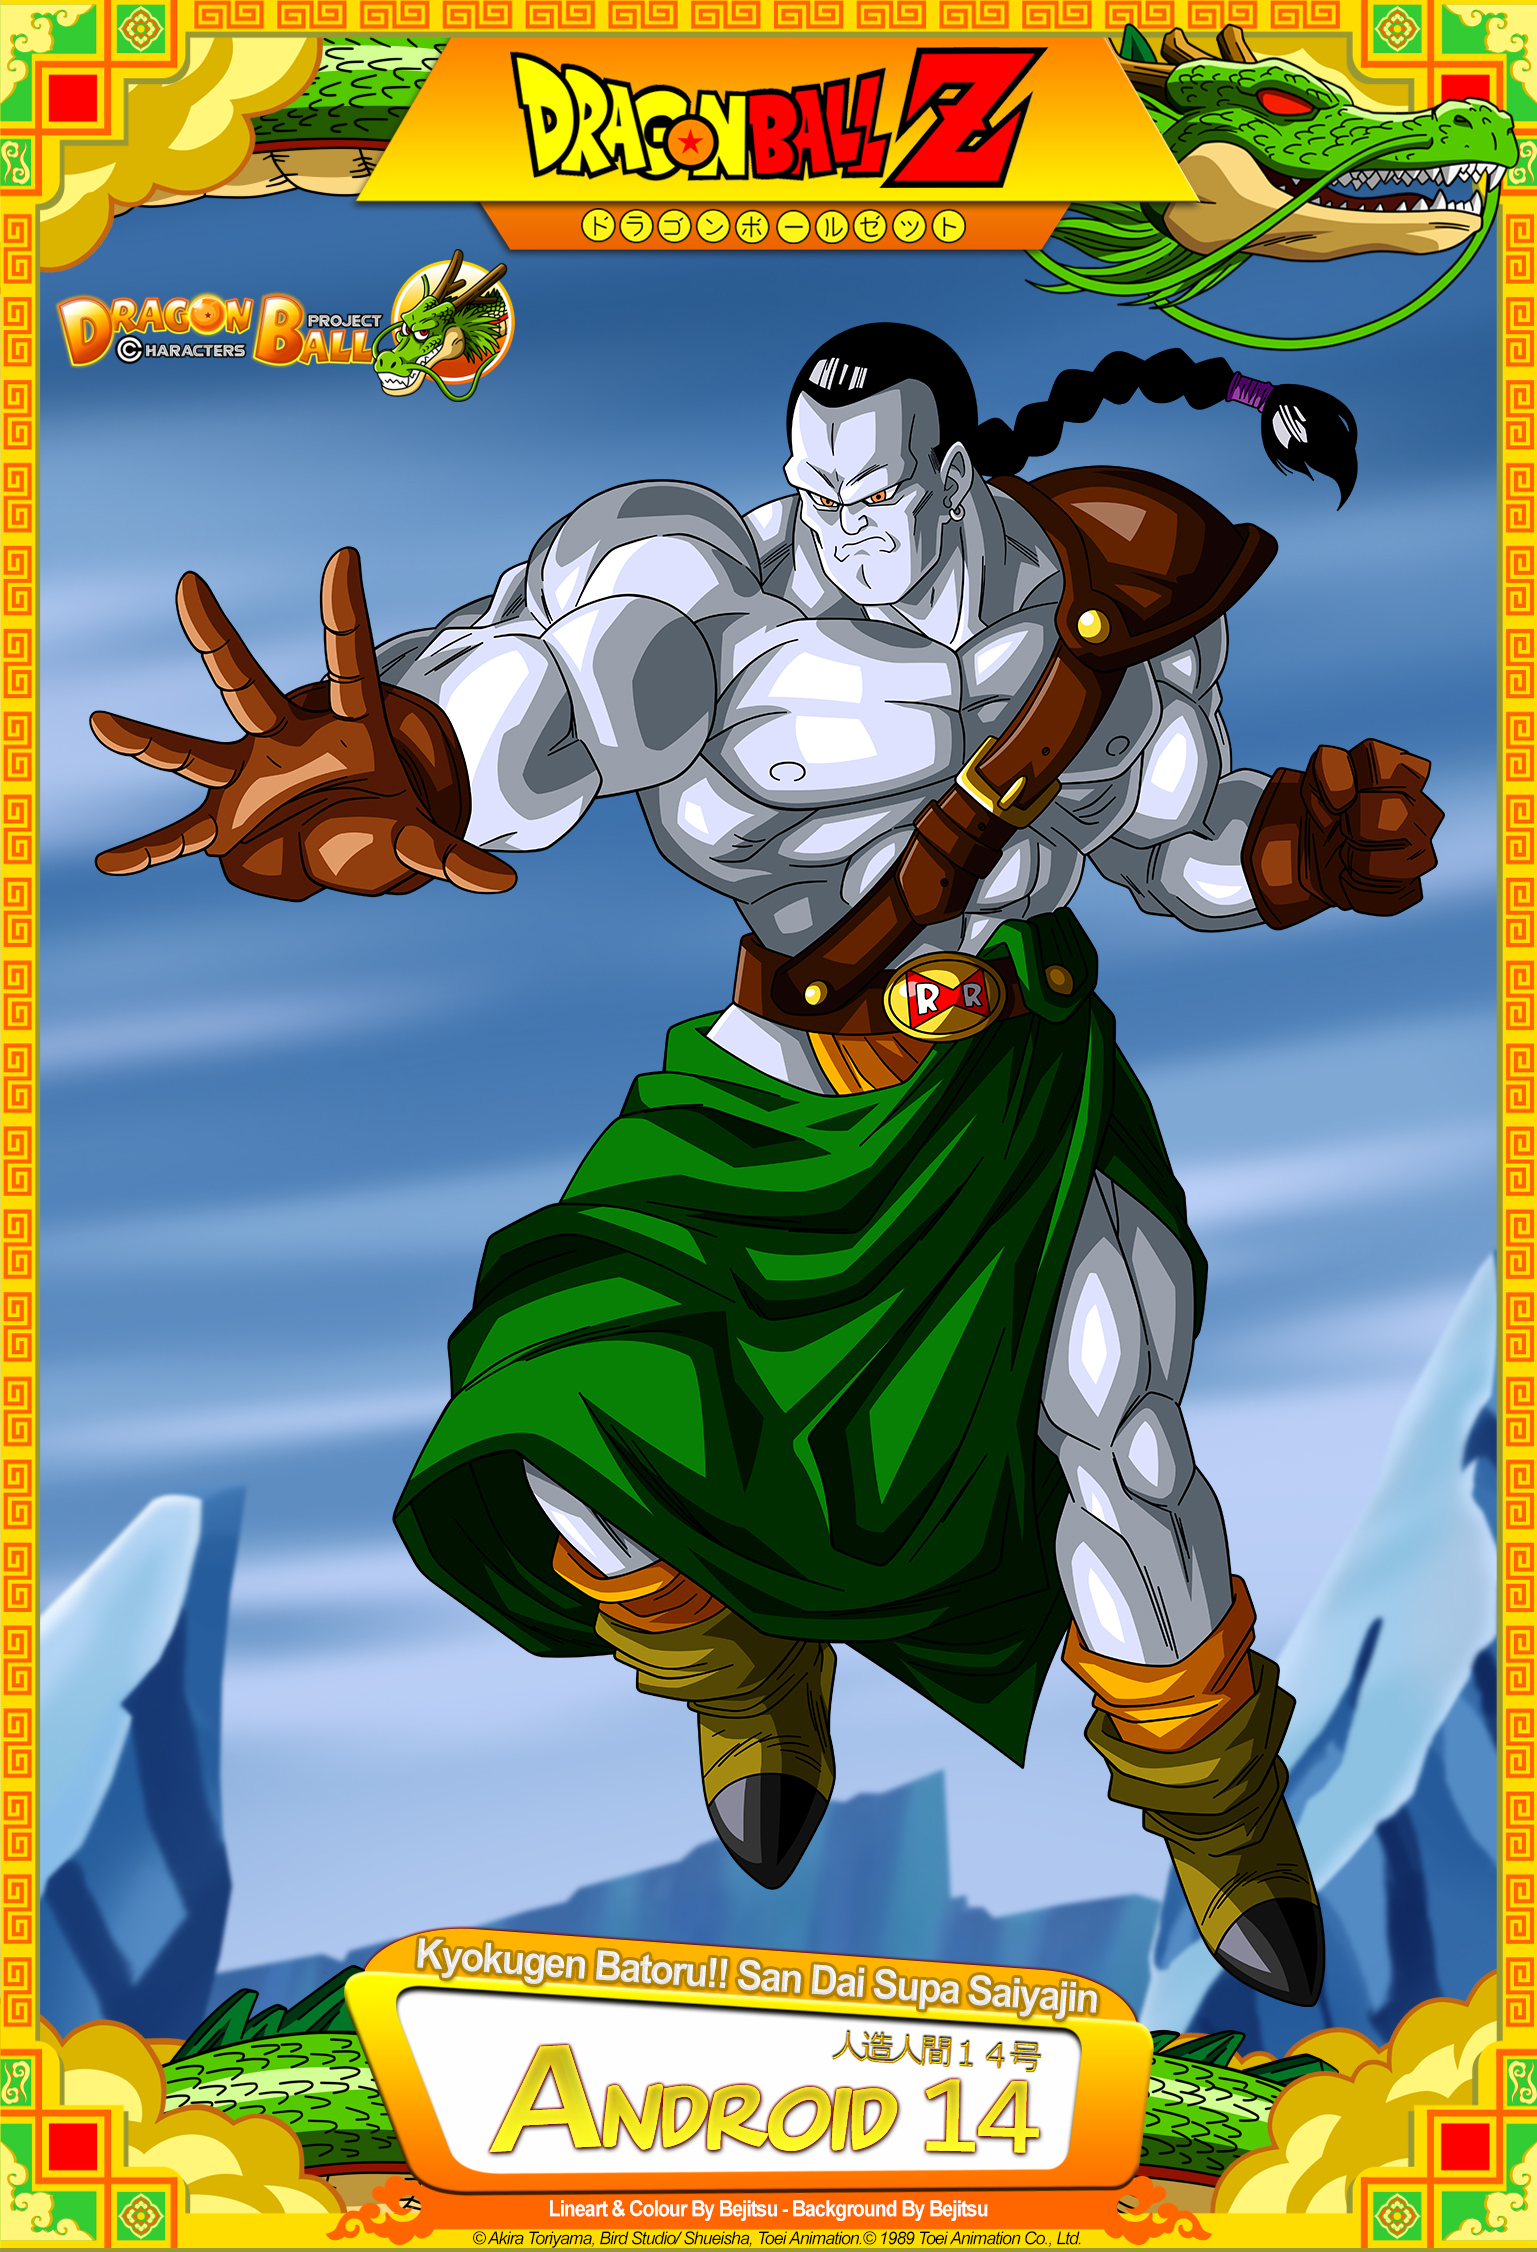 Dragon Ball Z - Android 14 by DBCProject on DeviantArt